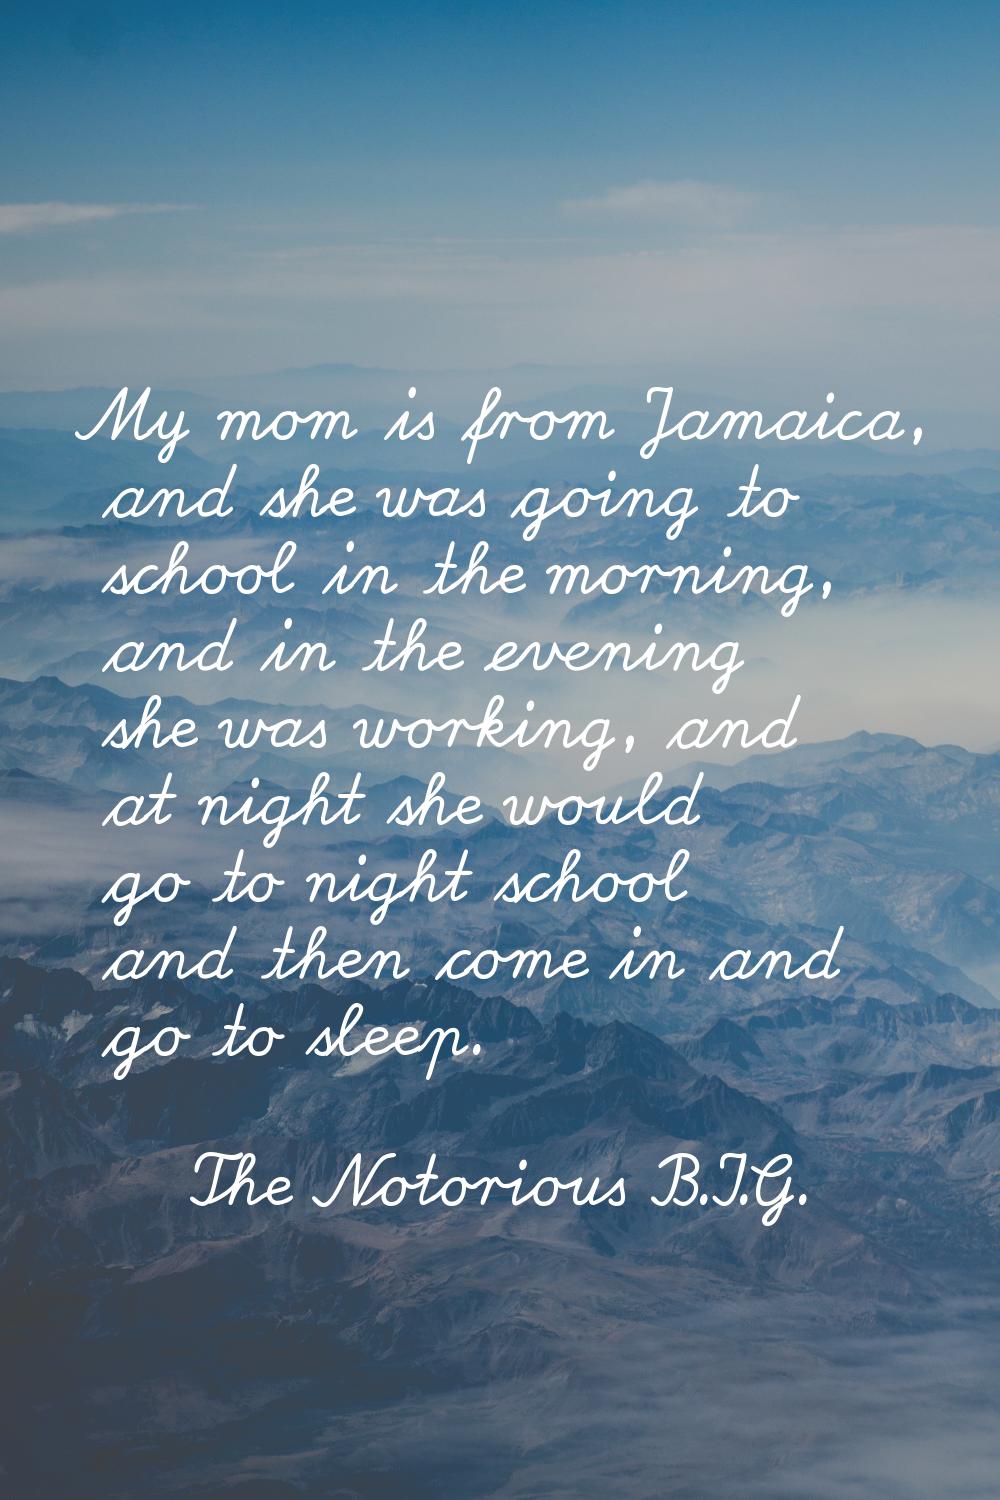 My mom is from Jamaica, and she was going to school in the morning, and in the evening she was work